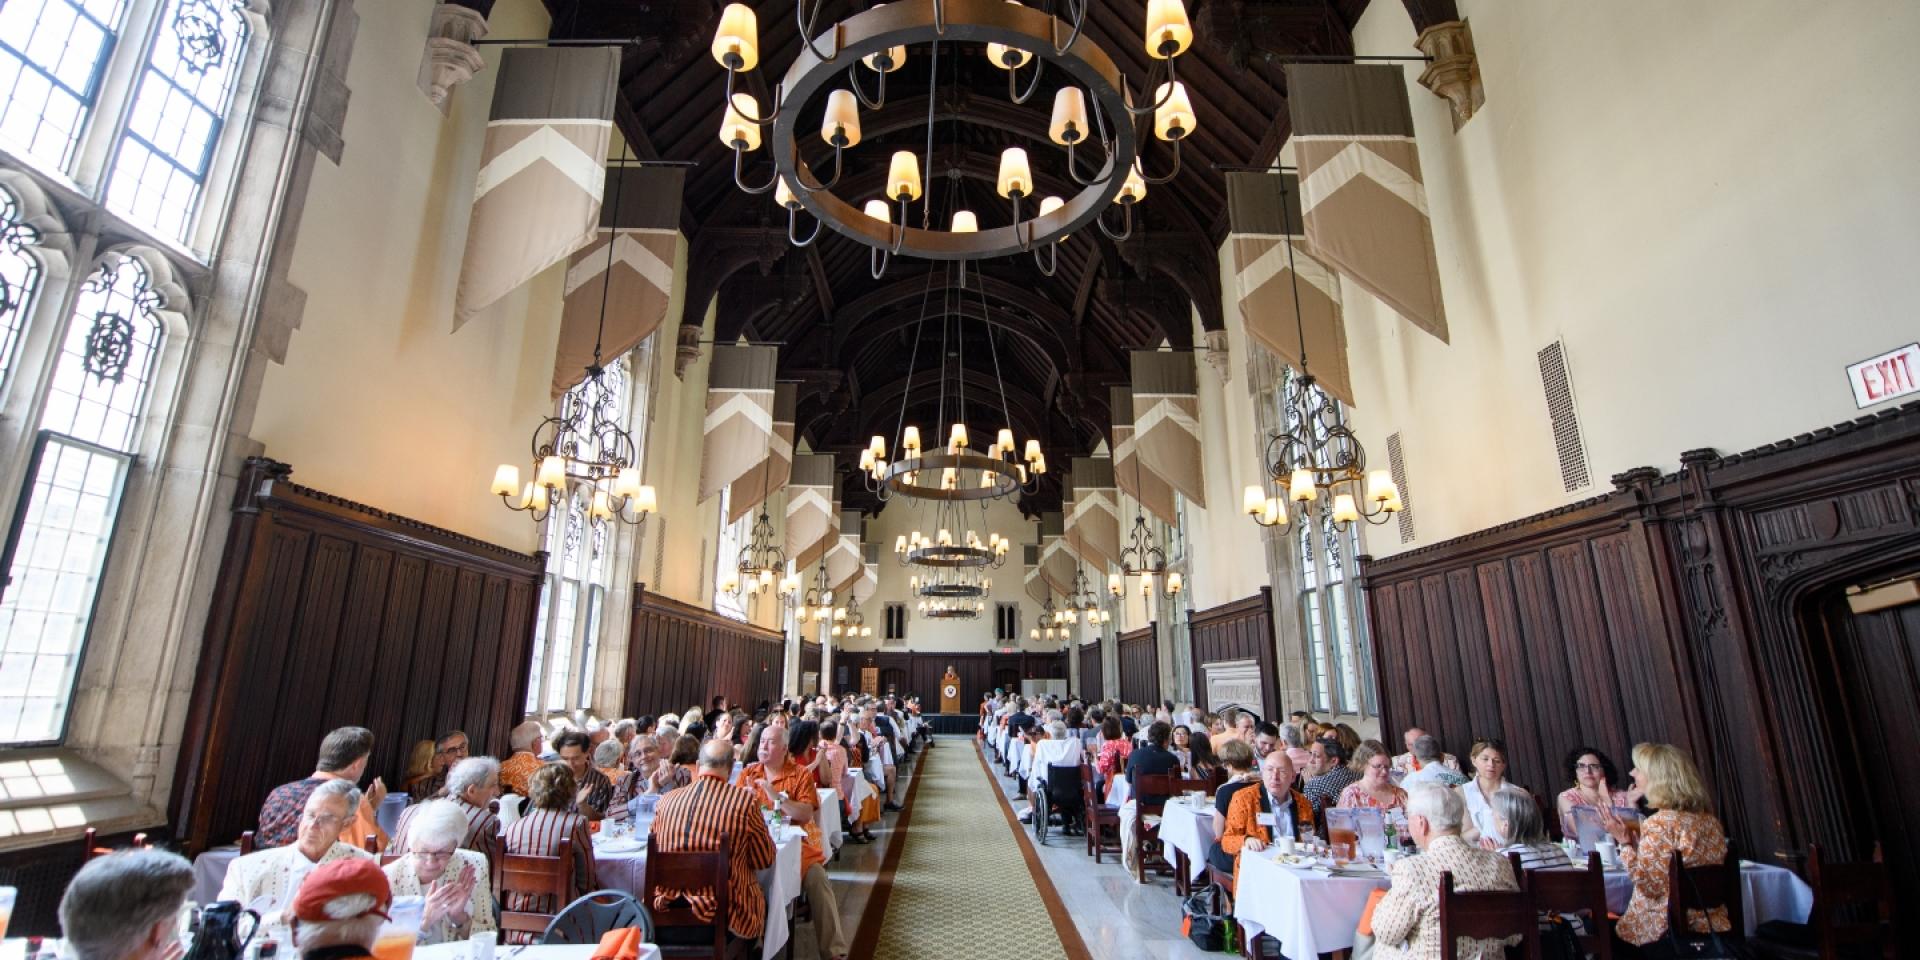 Alumni Council meeting in Rocky Dining Room during Reunions